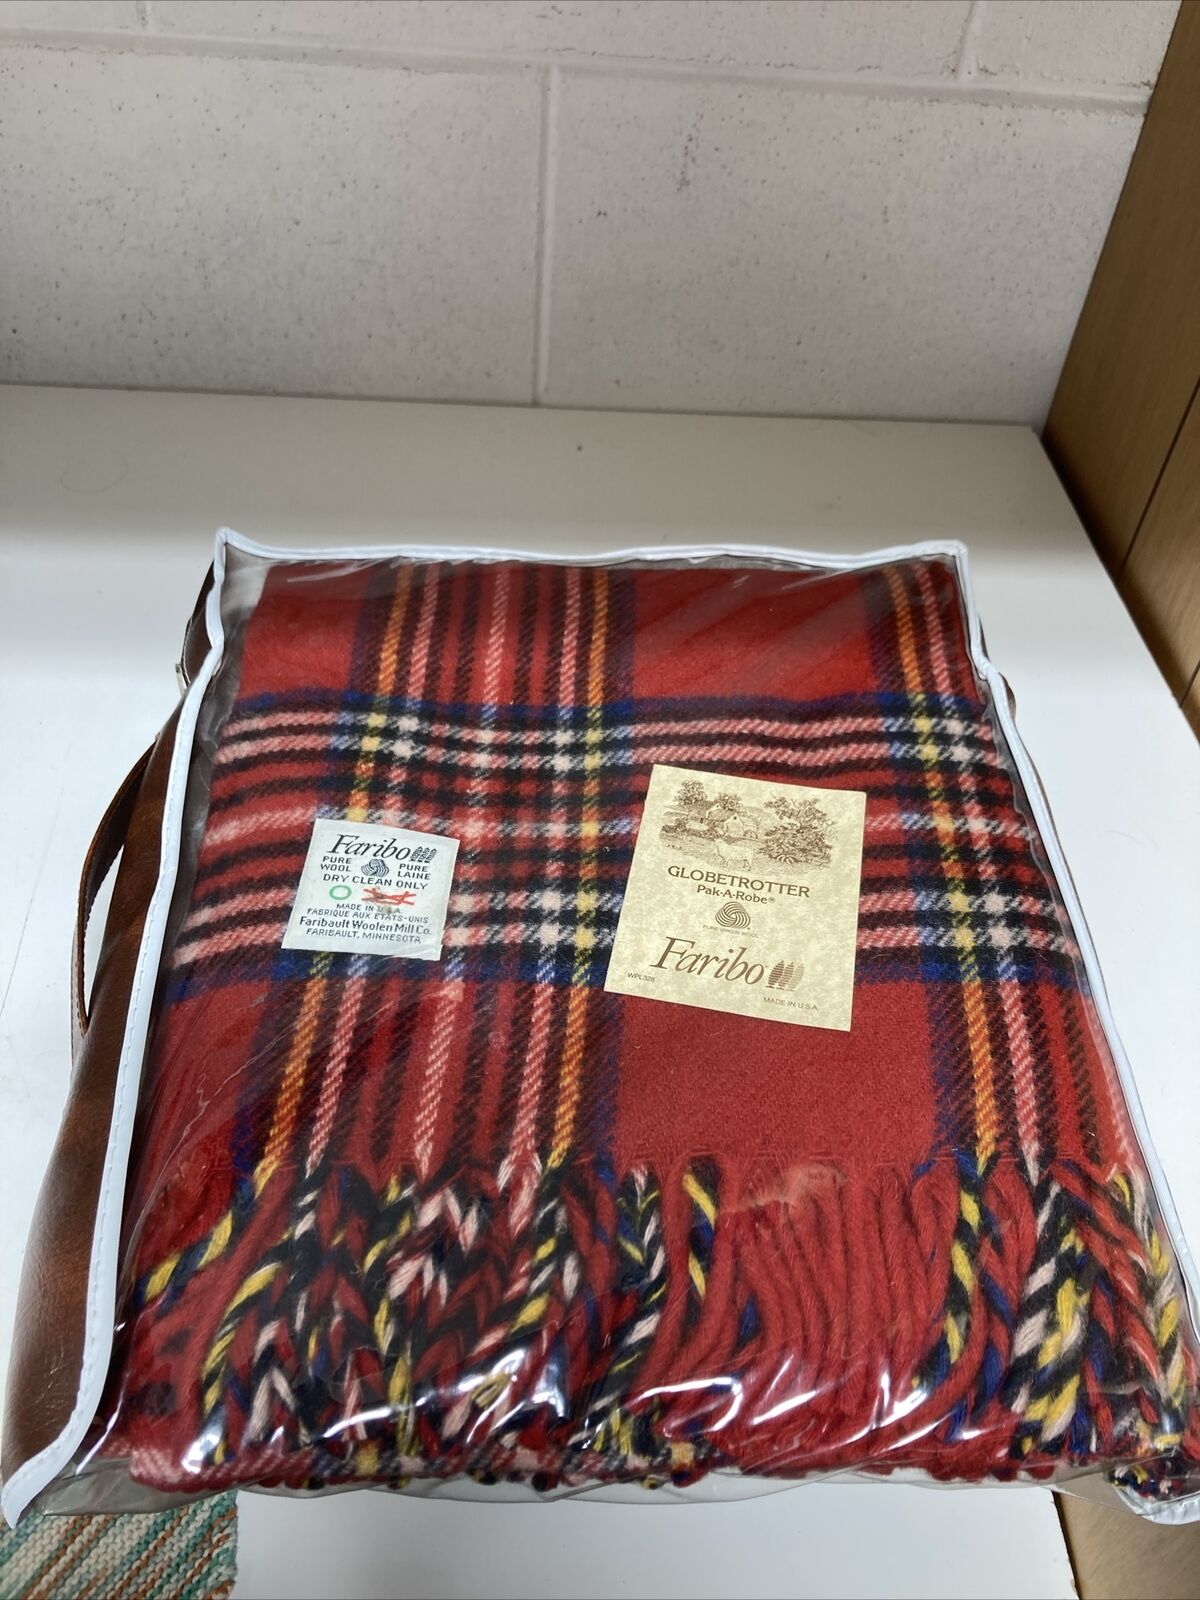 VTG Faribo PAK-A-ROBE Plaid Pure Wool Blanket and Zippered Case 50x60 New NWOT